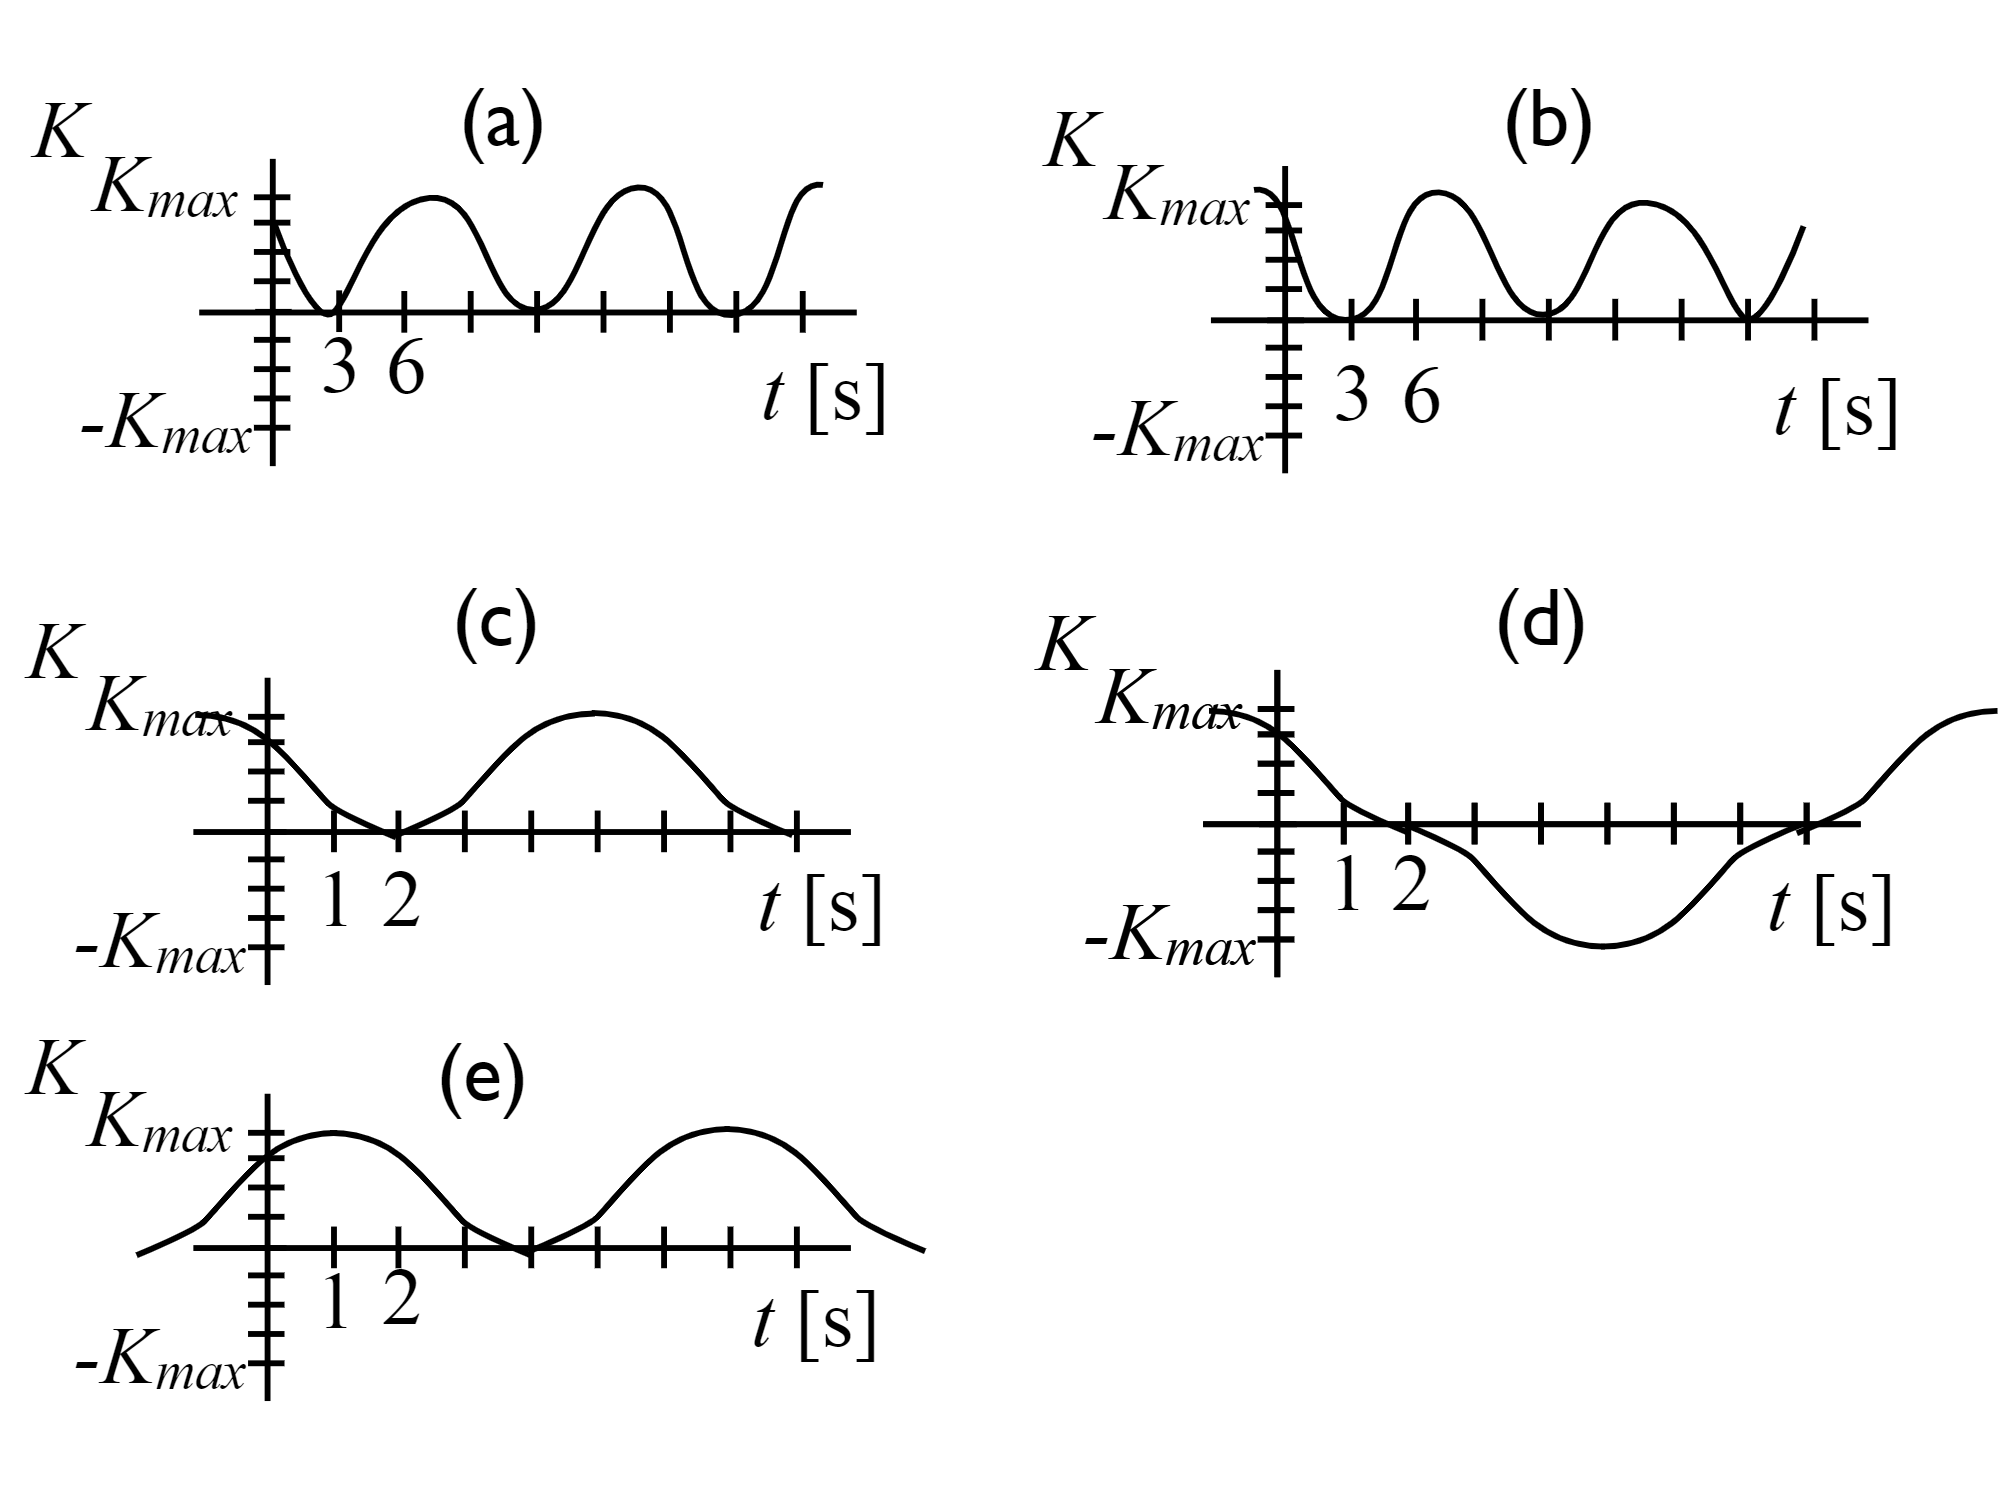 Image of five graphs. The five graphs represent the kinetic energy as a function of time for a simple harmonic oscillator. Graph A shows positive kinetic energy at all times with K = 0 at t = 1s. Graph B shows positive kinetic energy at all times with K = 0 at t = 1s. Graph C shows positive kinetic energy at all times with K = 0 at t = 2s. Graph D shows negative kinetic energy at 2s < t < 8s with K = 0 at t = 2s and t = 8s. Graph E shows positive kinetic energy at all times with K = 0 at t = 4s.